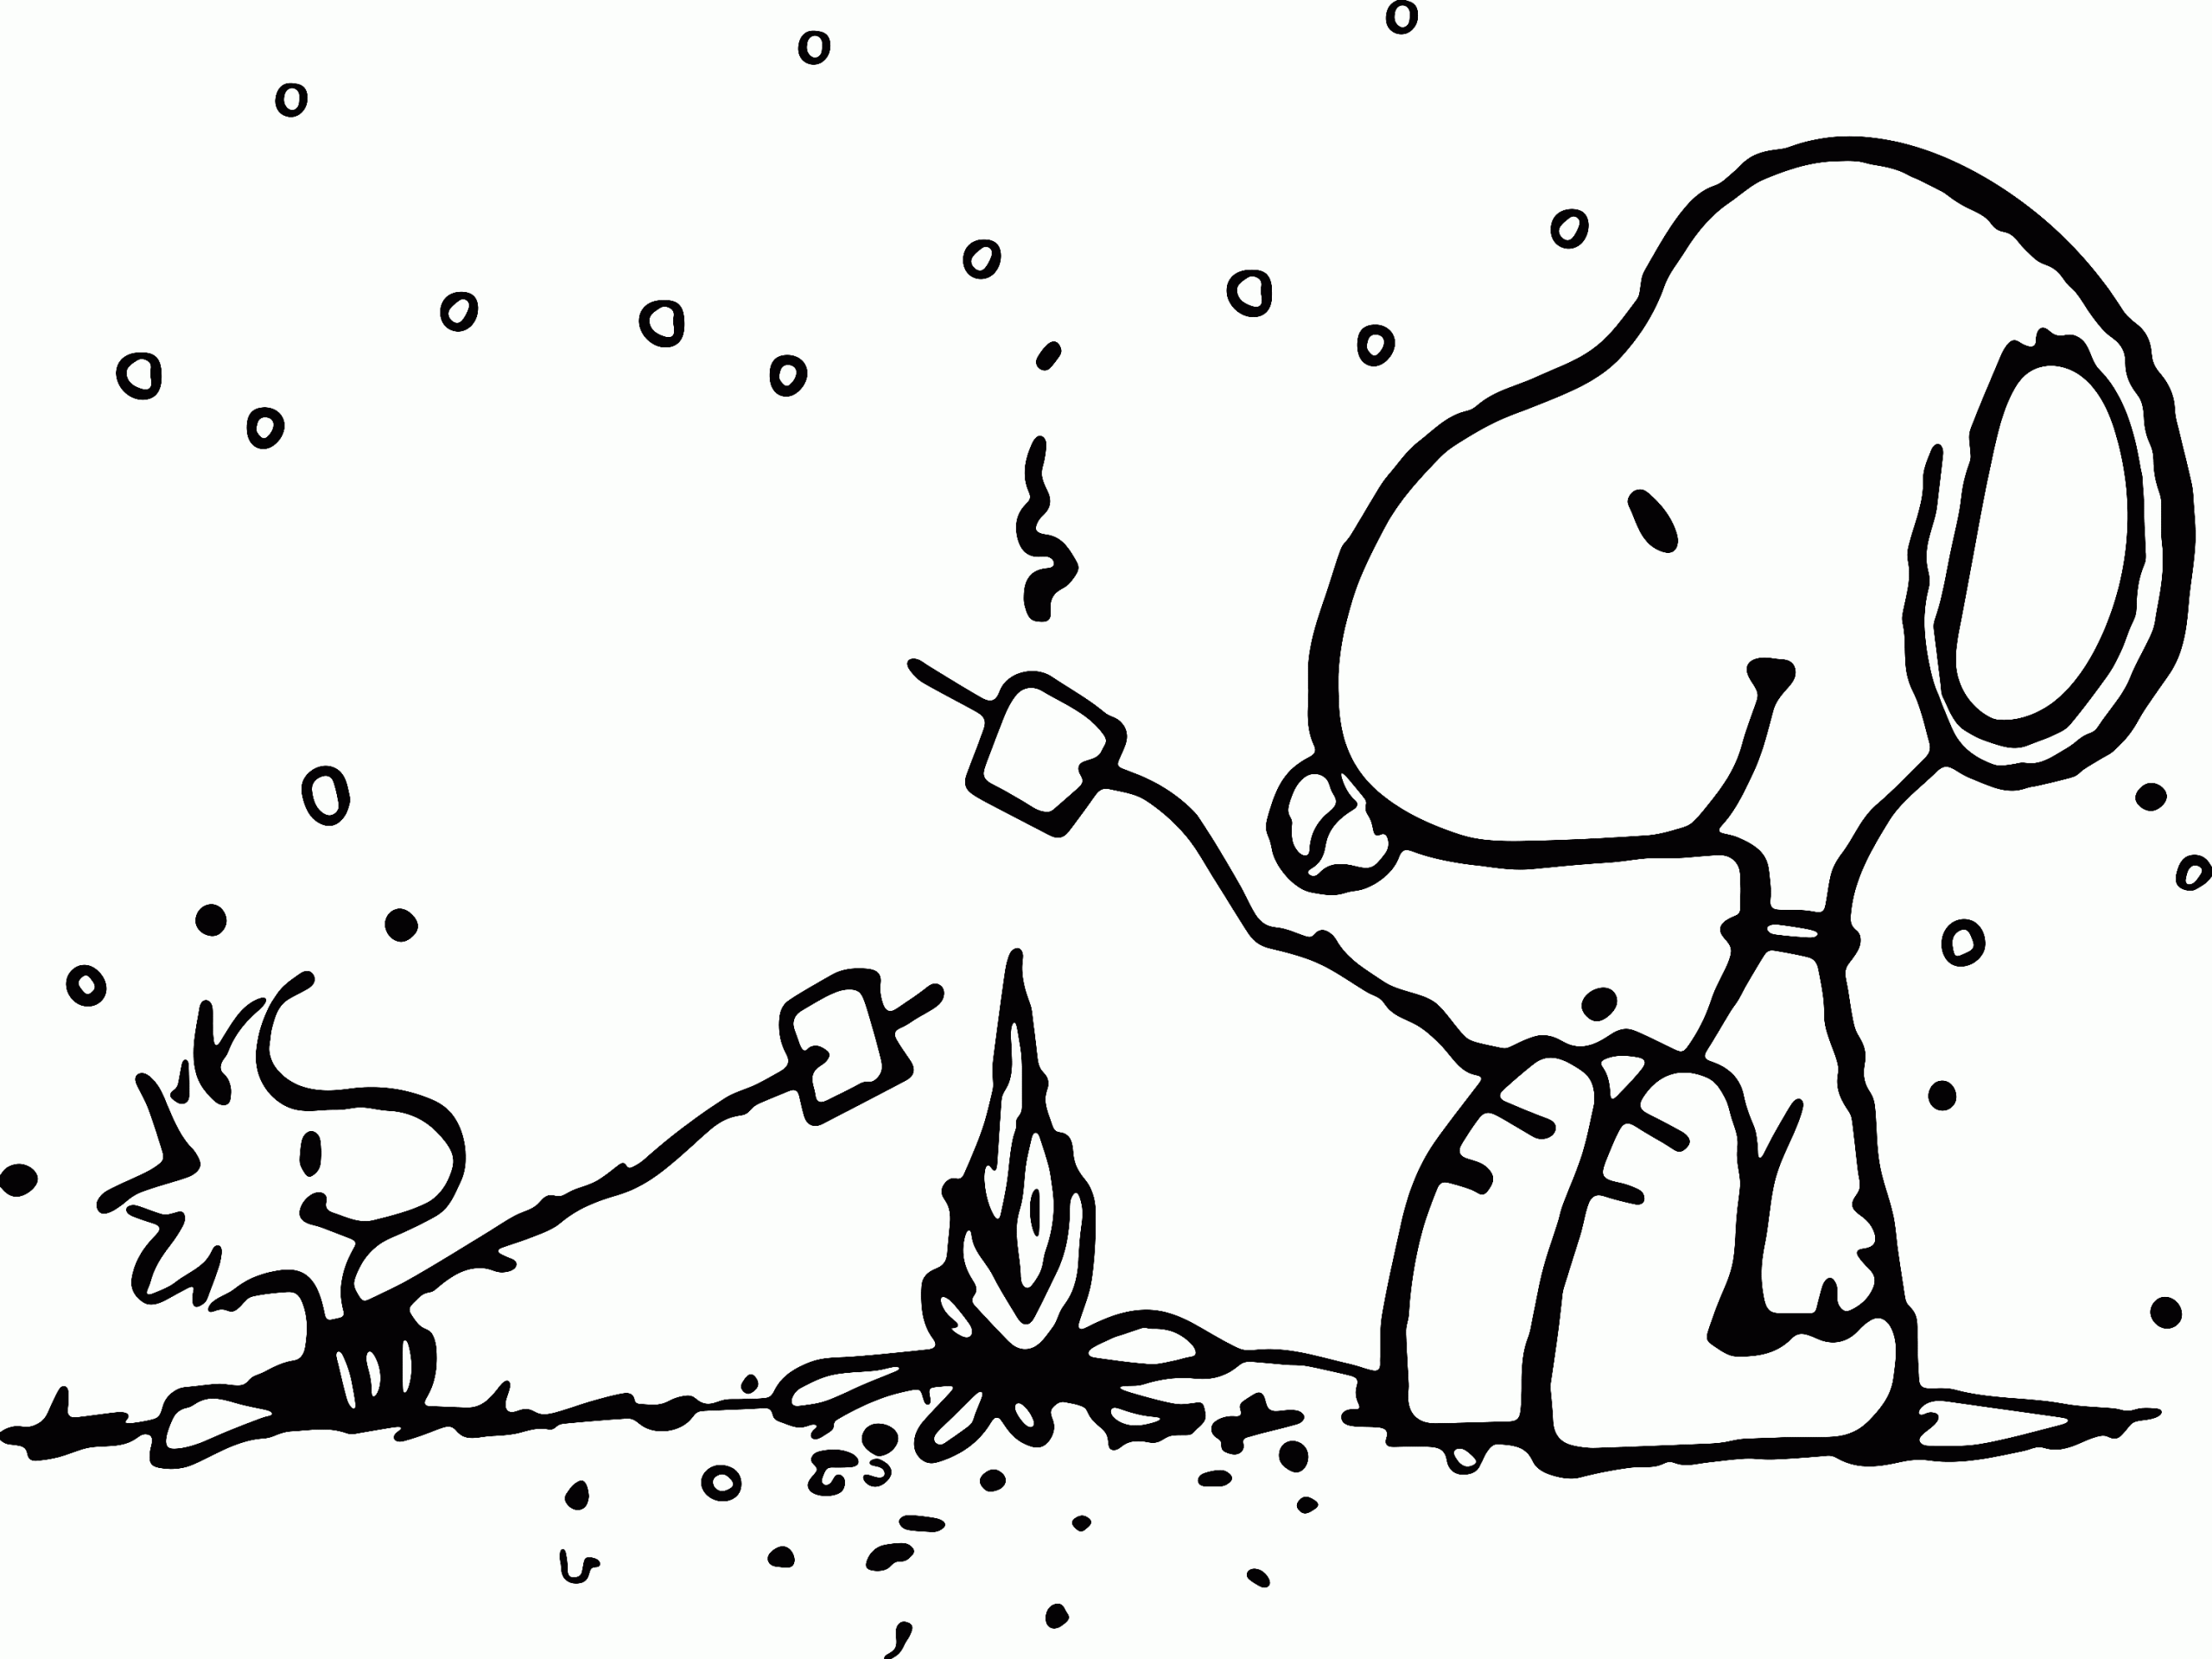 Printable Coloring Page of Snoopy and Woodstock Having a Marshmallow Campfire Toast